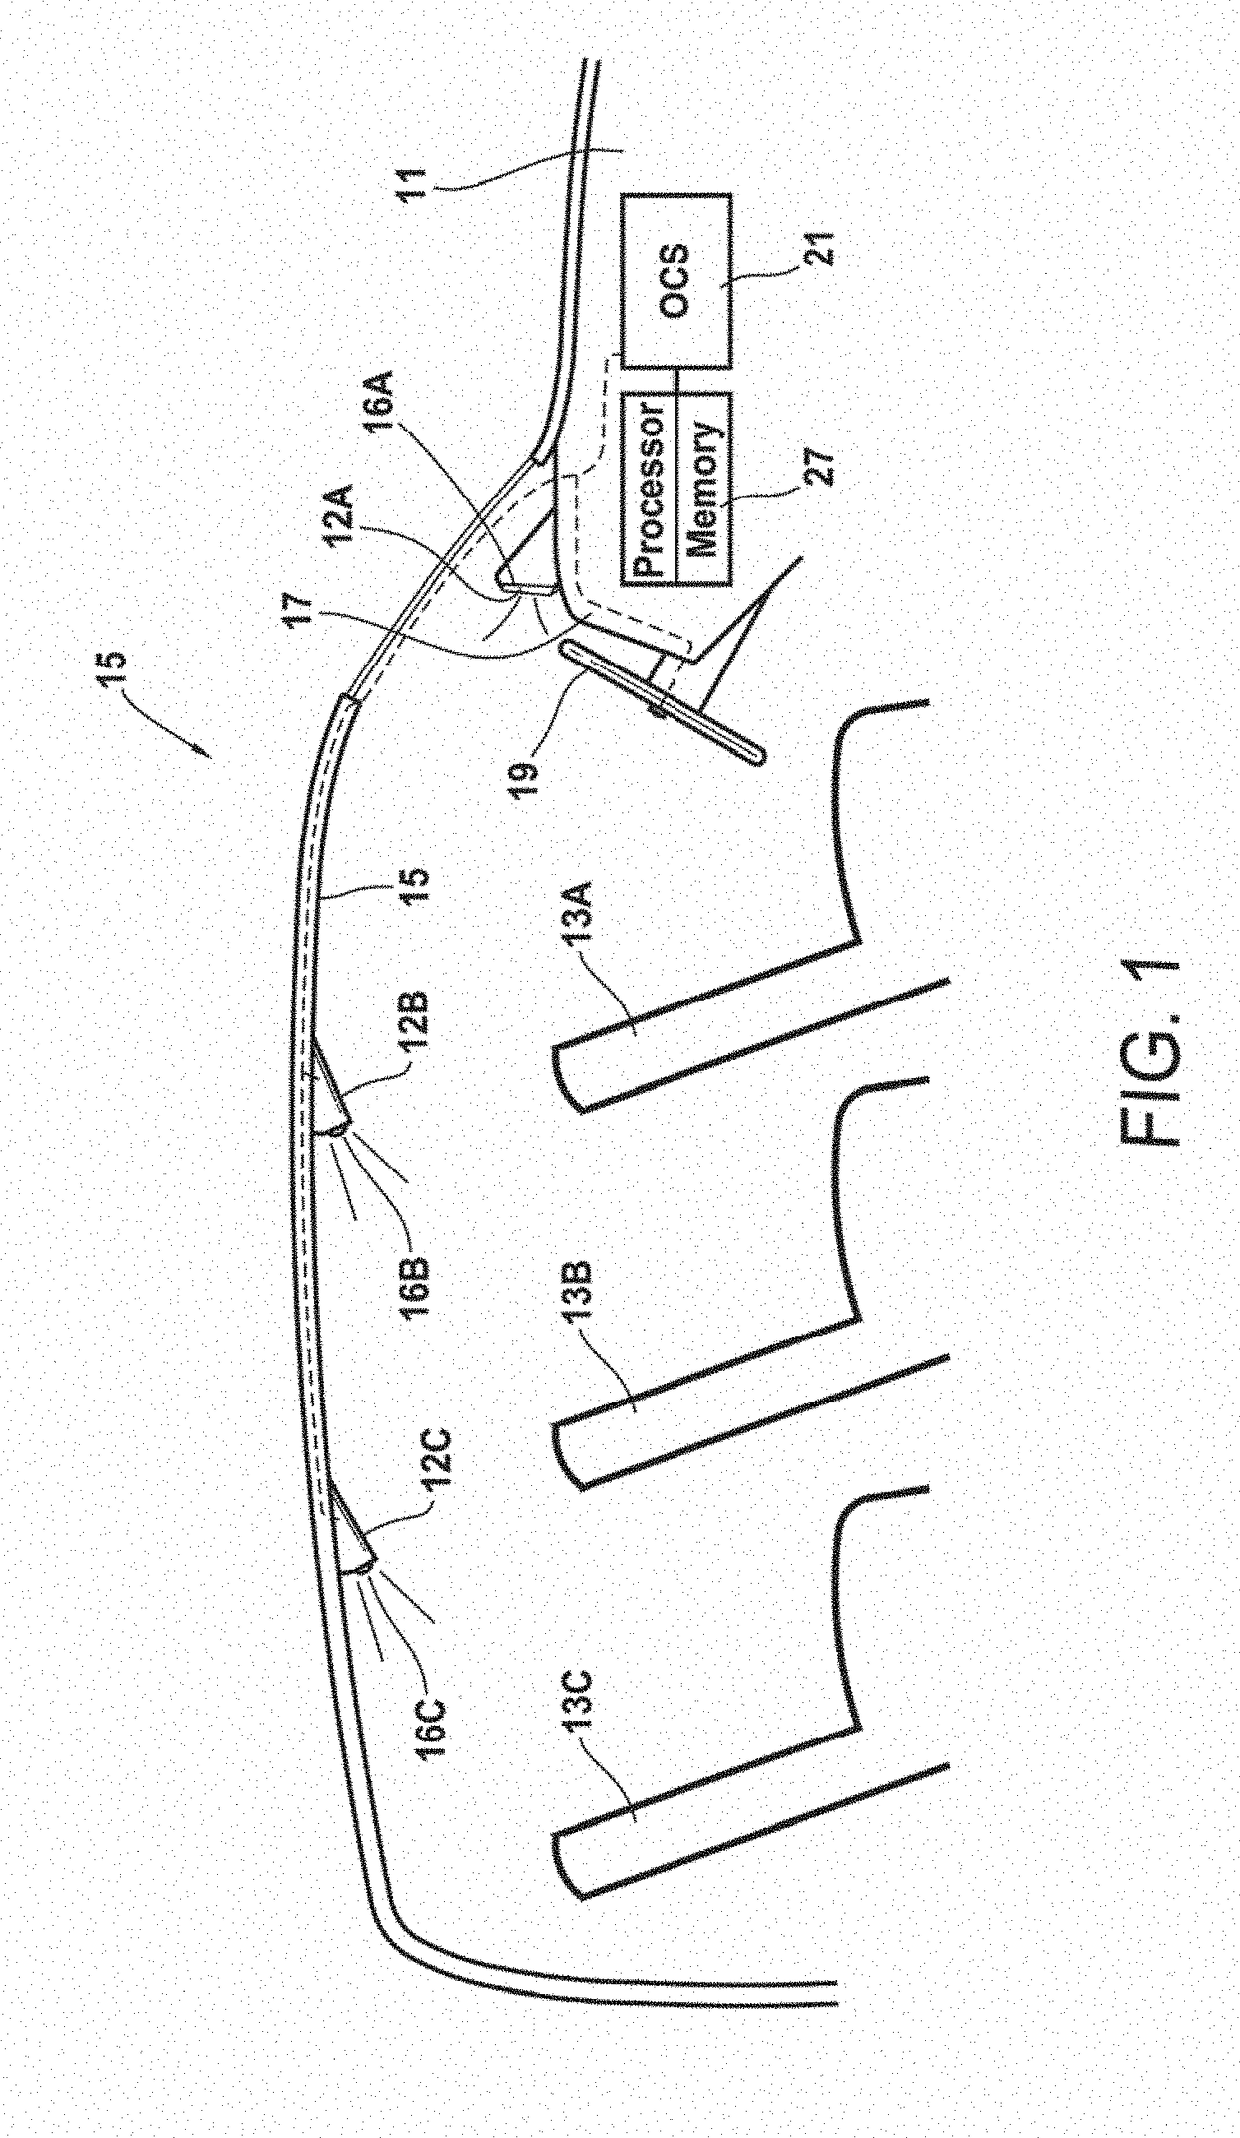 Detection and Monitoring of Occupant Seat Belt